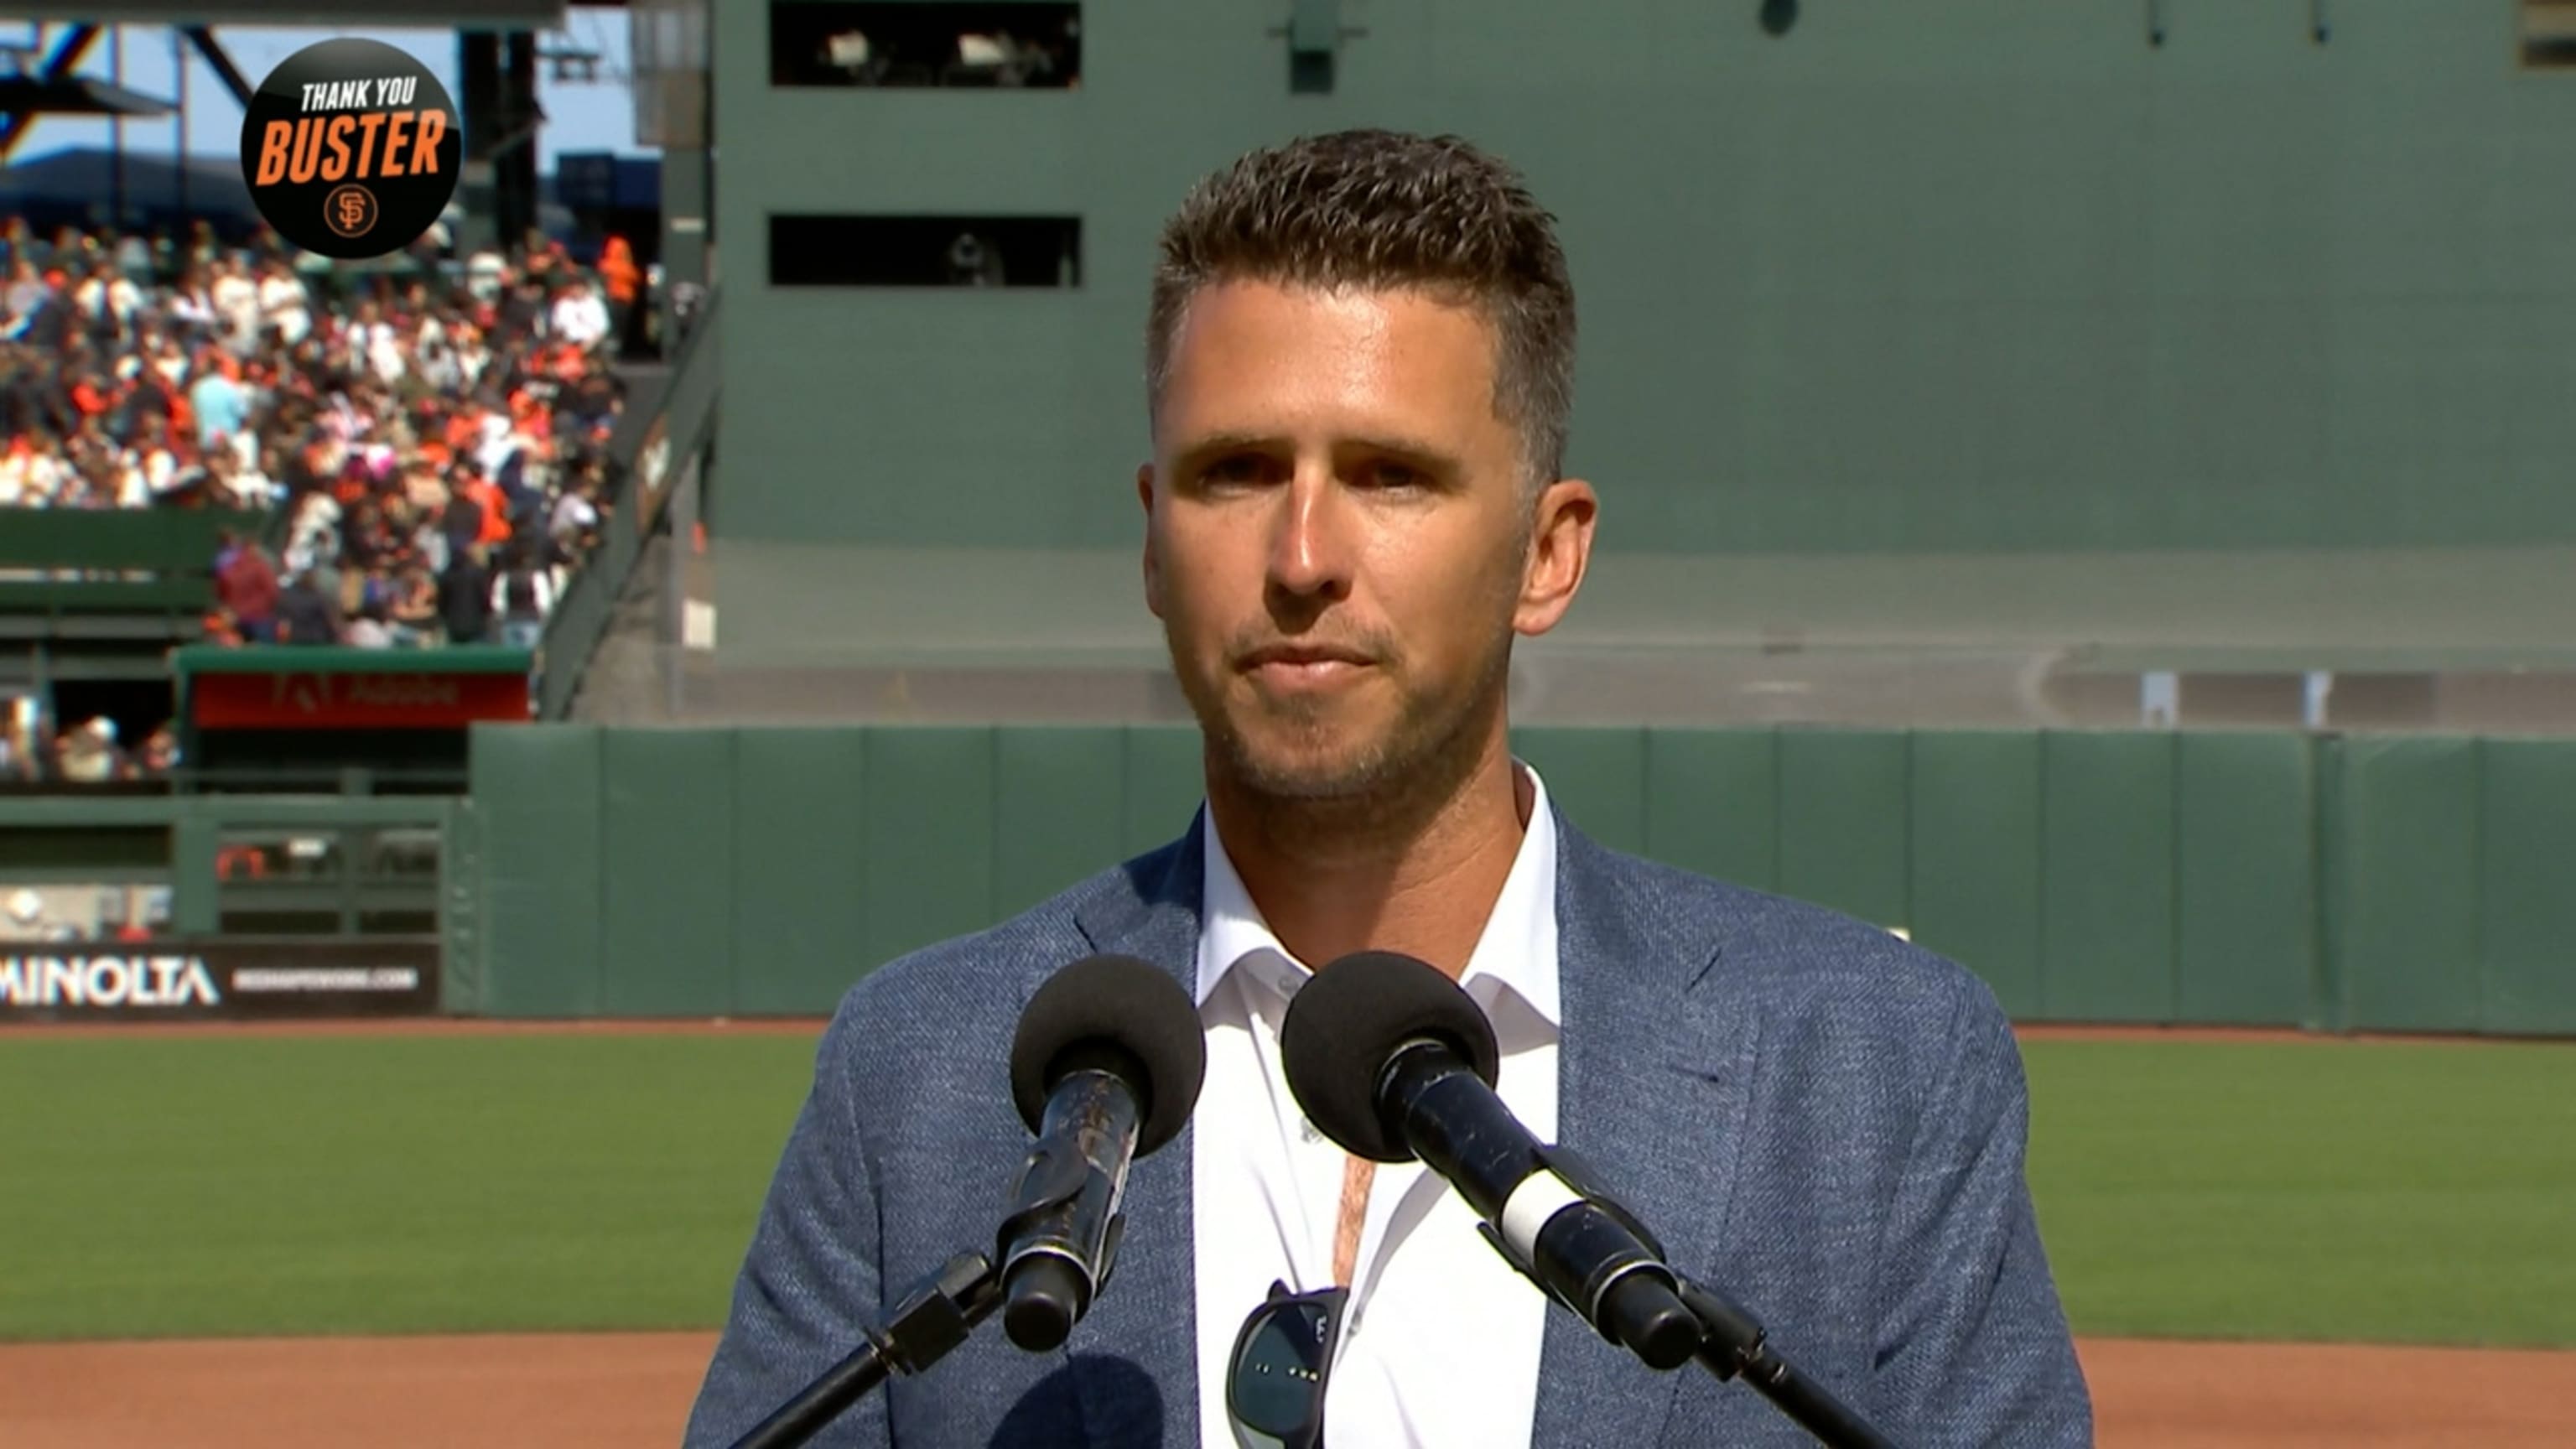 Buster Posey of the San Francisco Giants Wins Phi Delta Theta Fraternity's  Lou Gehrig Memorial Award - Phi Delta Theta Fraternity